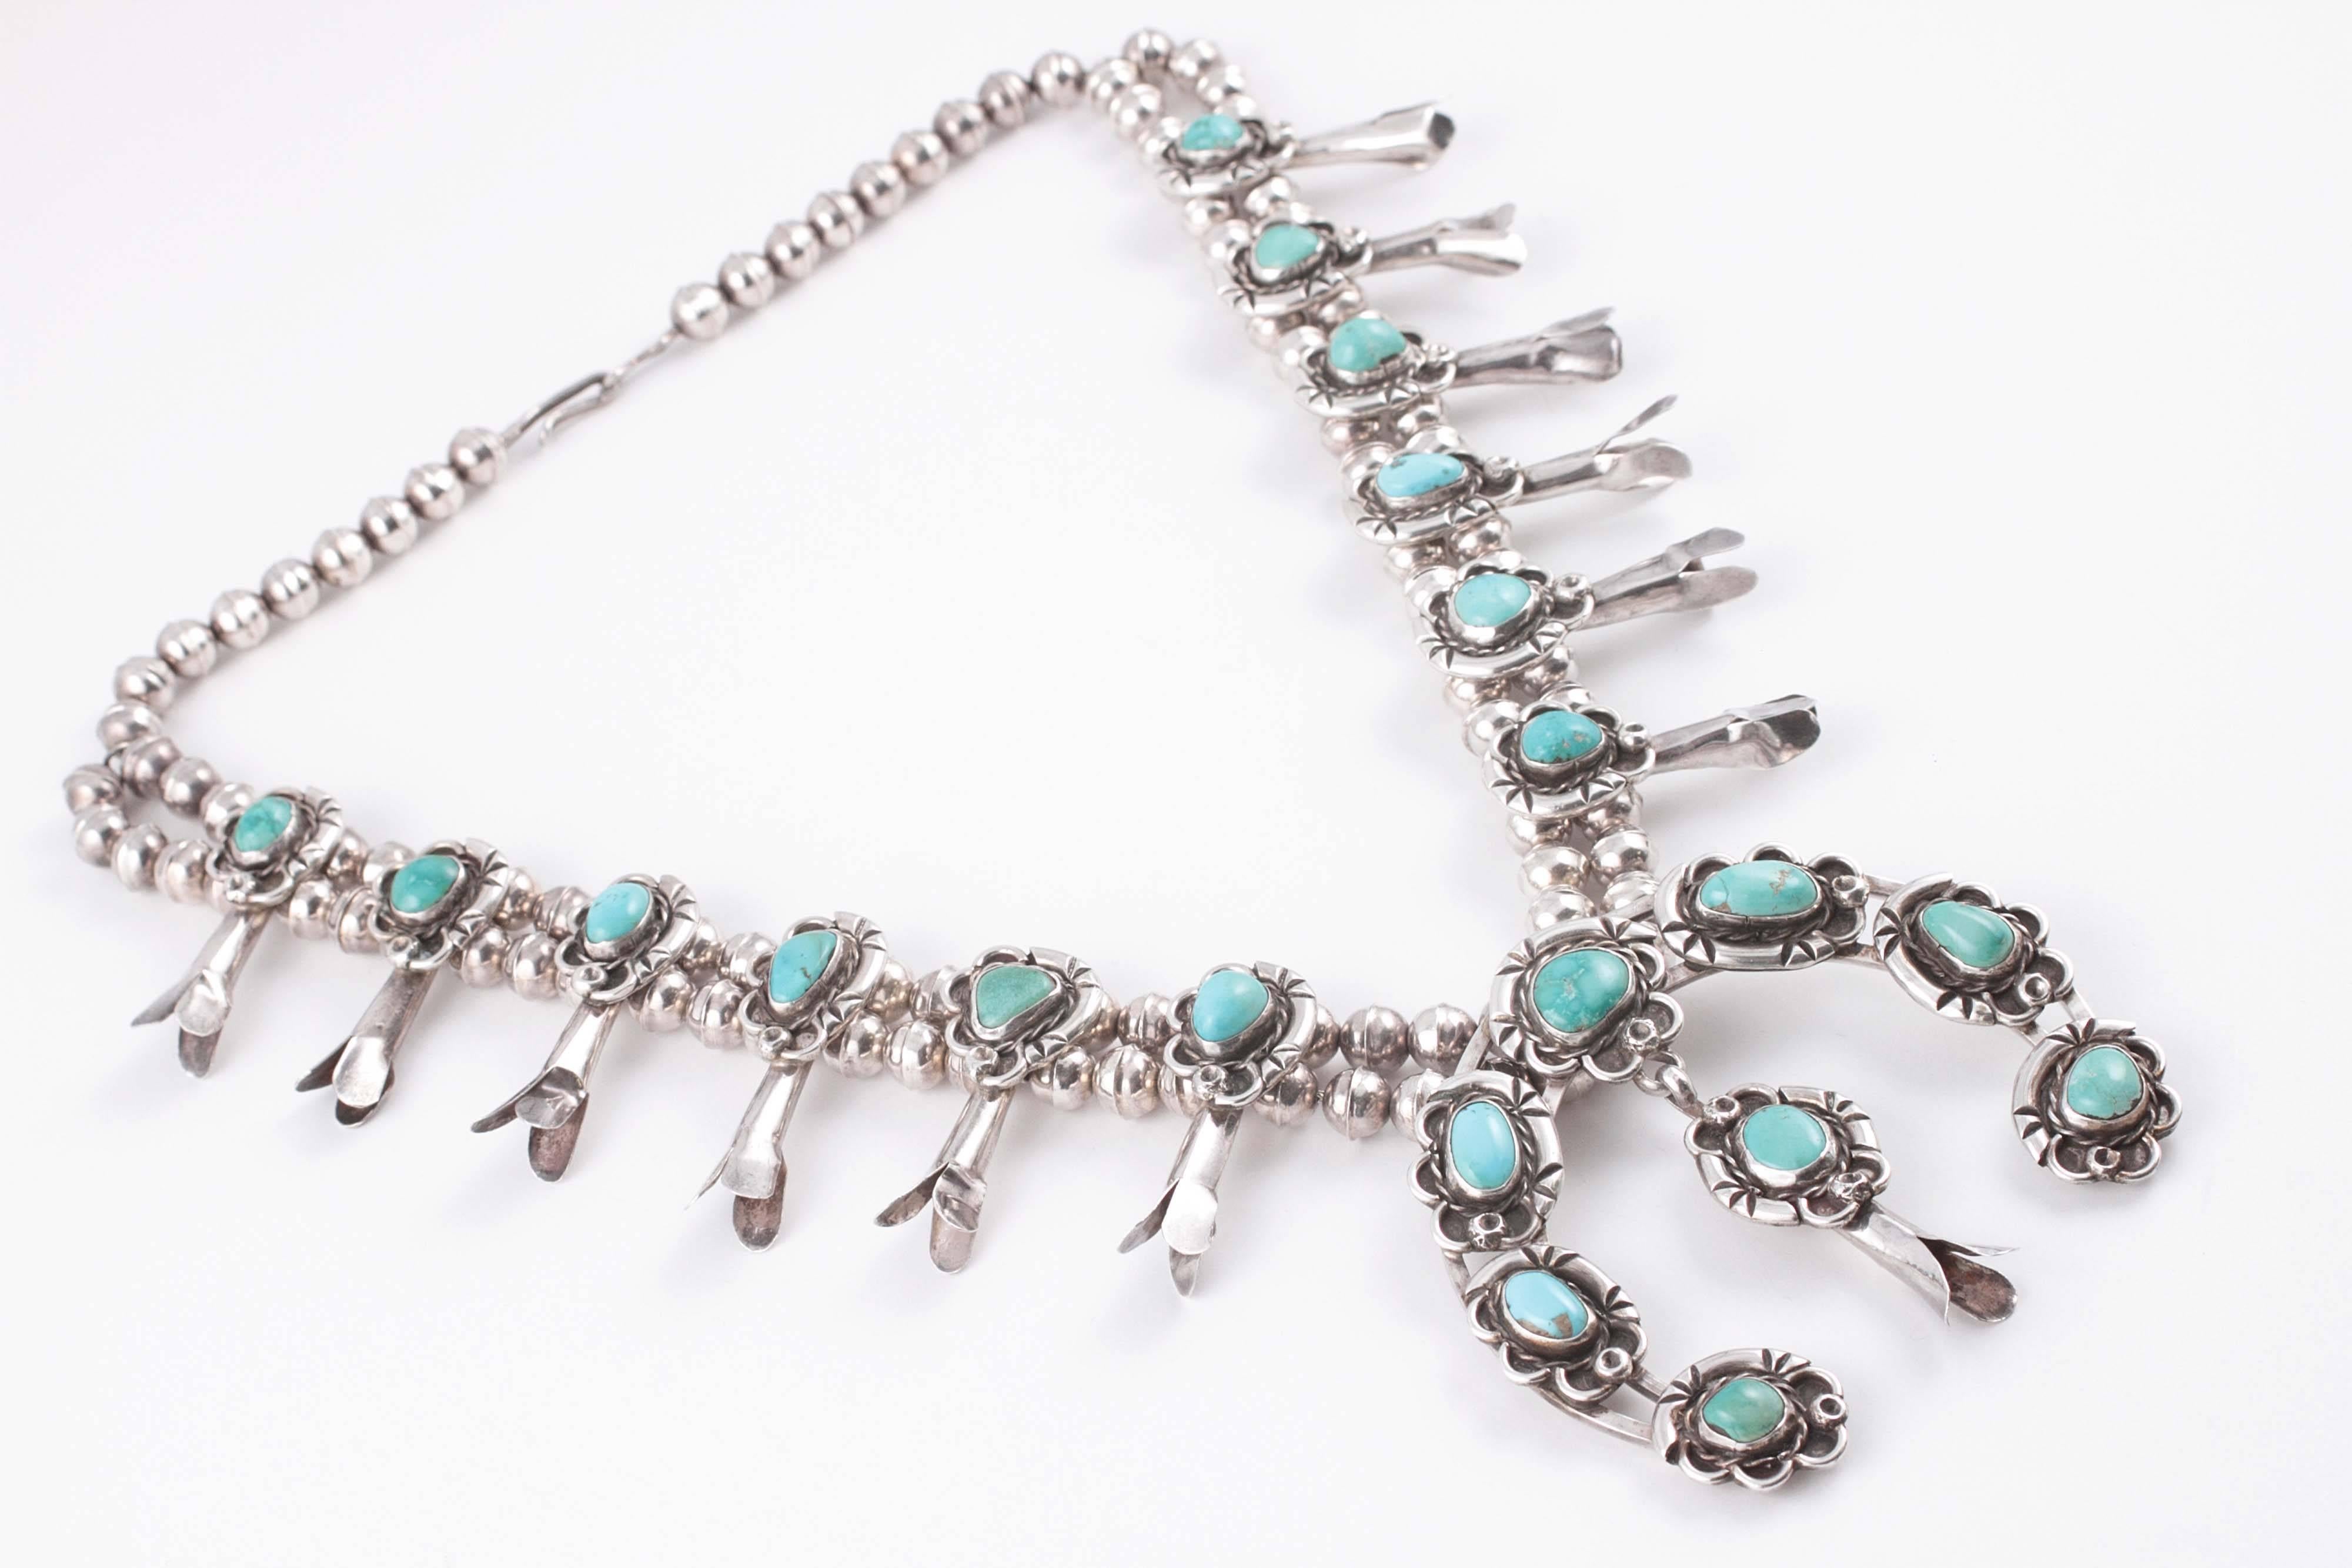 Women's Silver Squash Blossom turquoise necklace